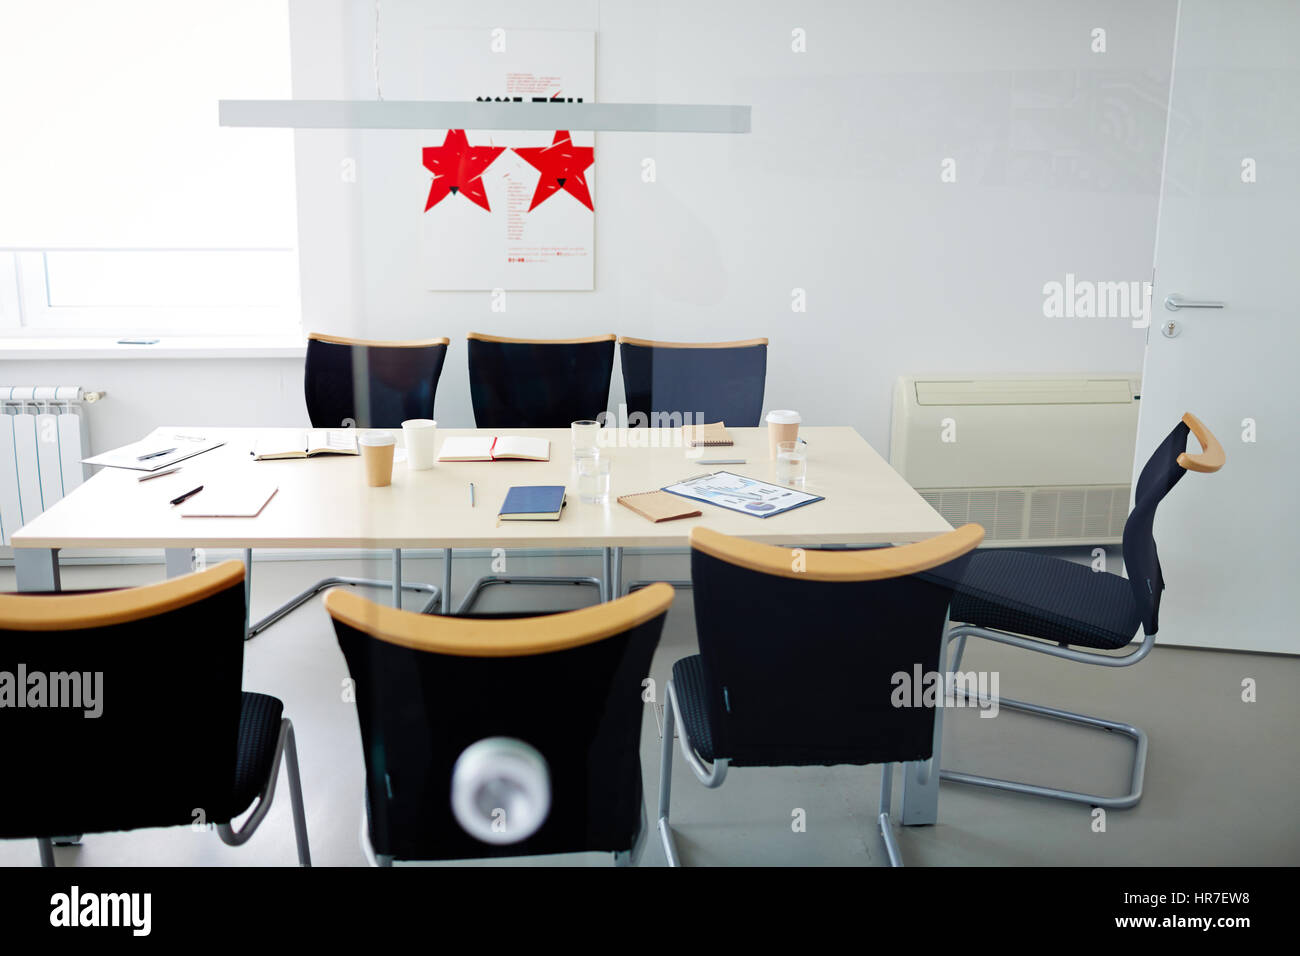 Modern Office Interior Conference Room With Large Table And